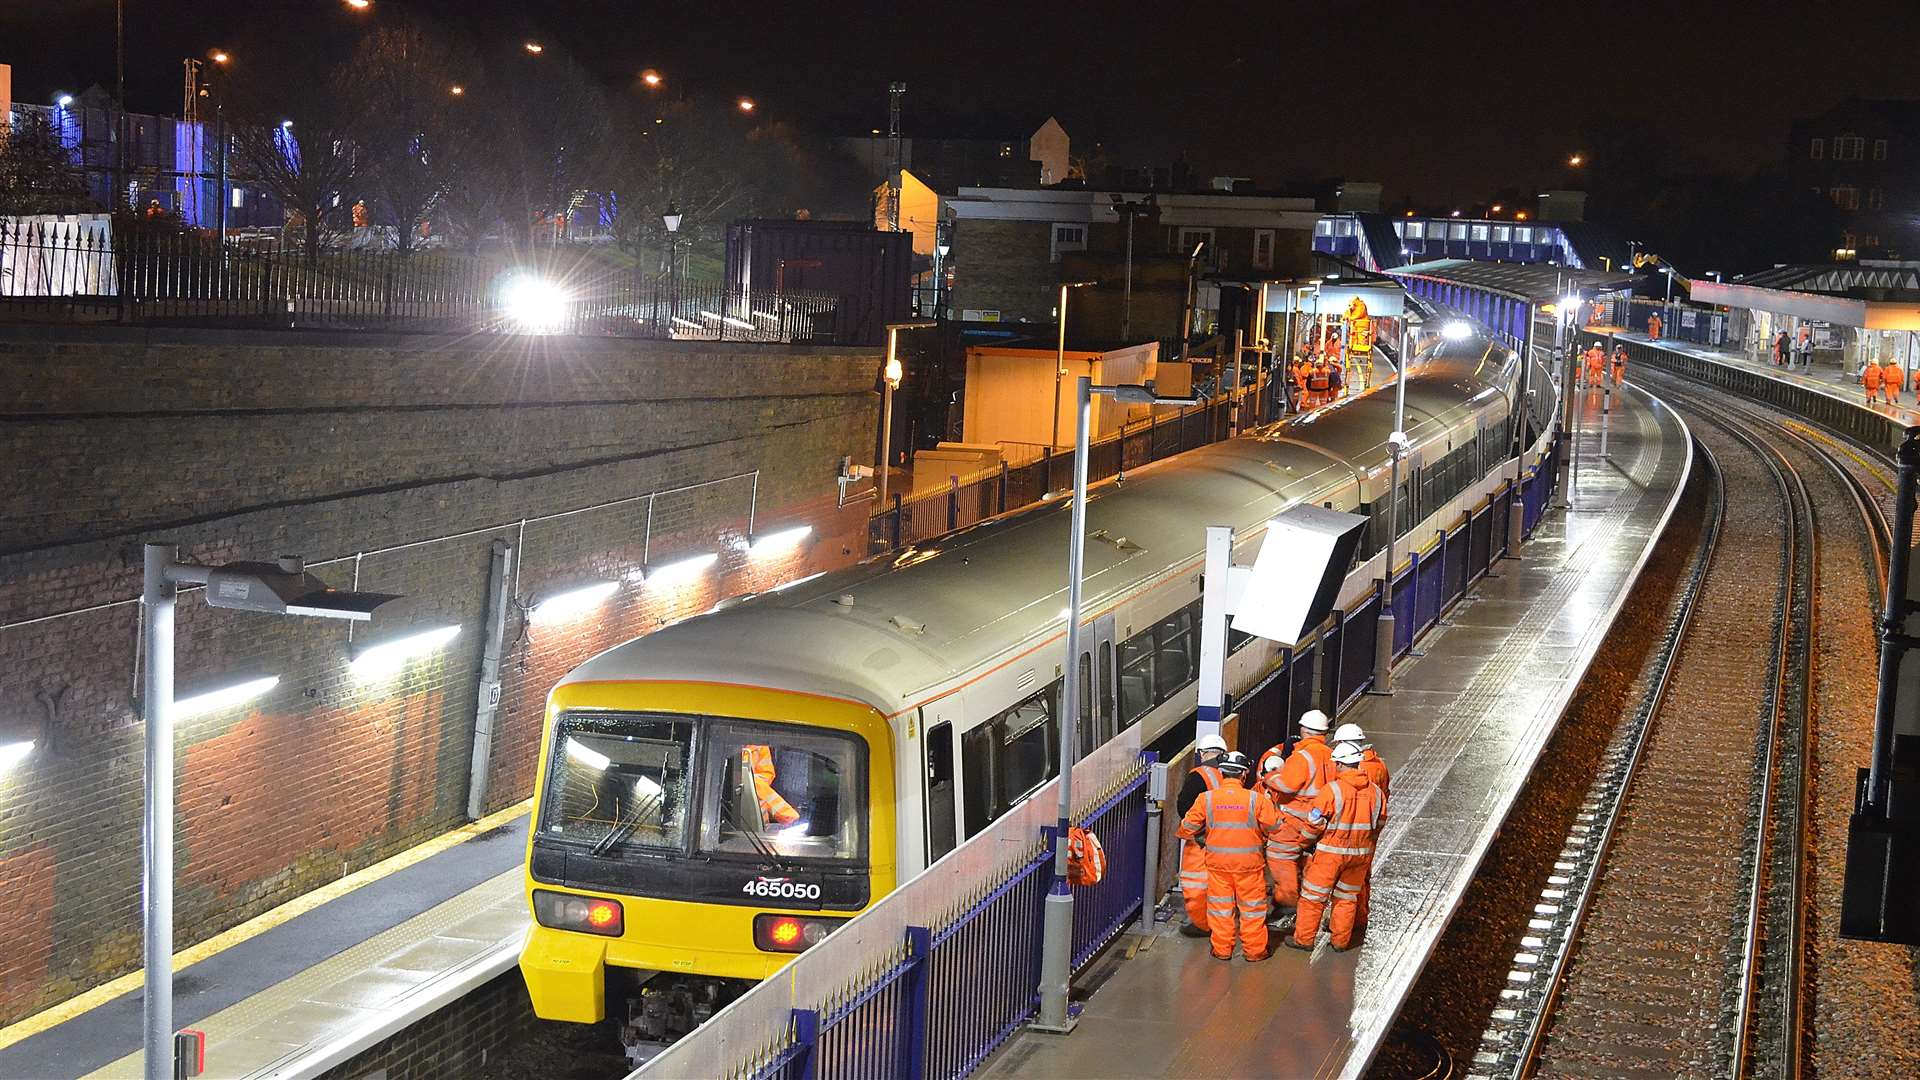 The station was closed for 15 days over the Christmas period so that a new platform could be installed. Picture: Jason Arthur